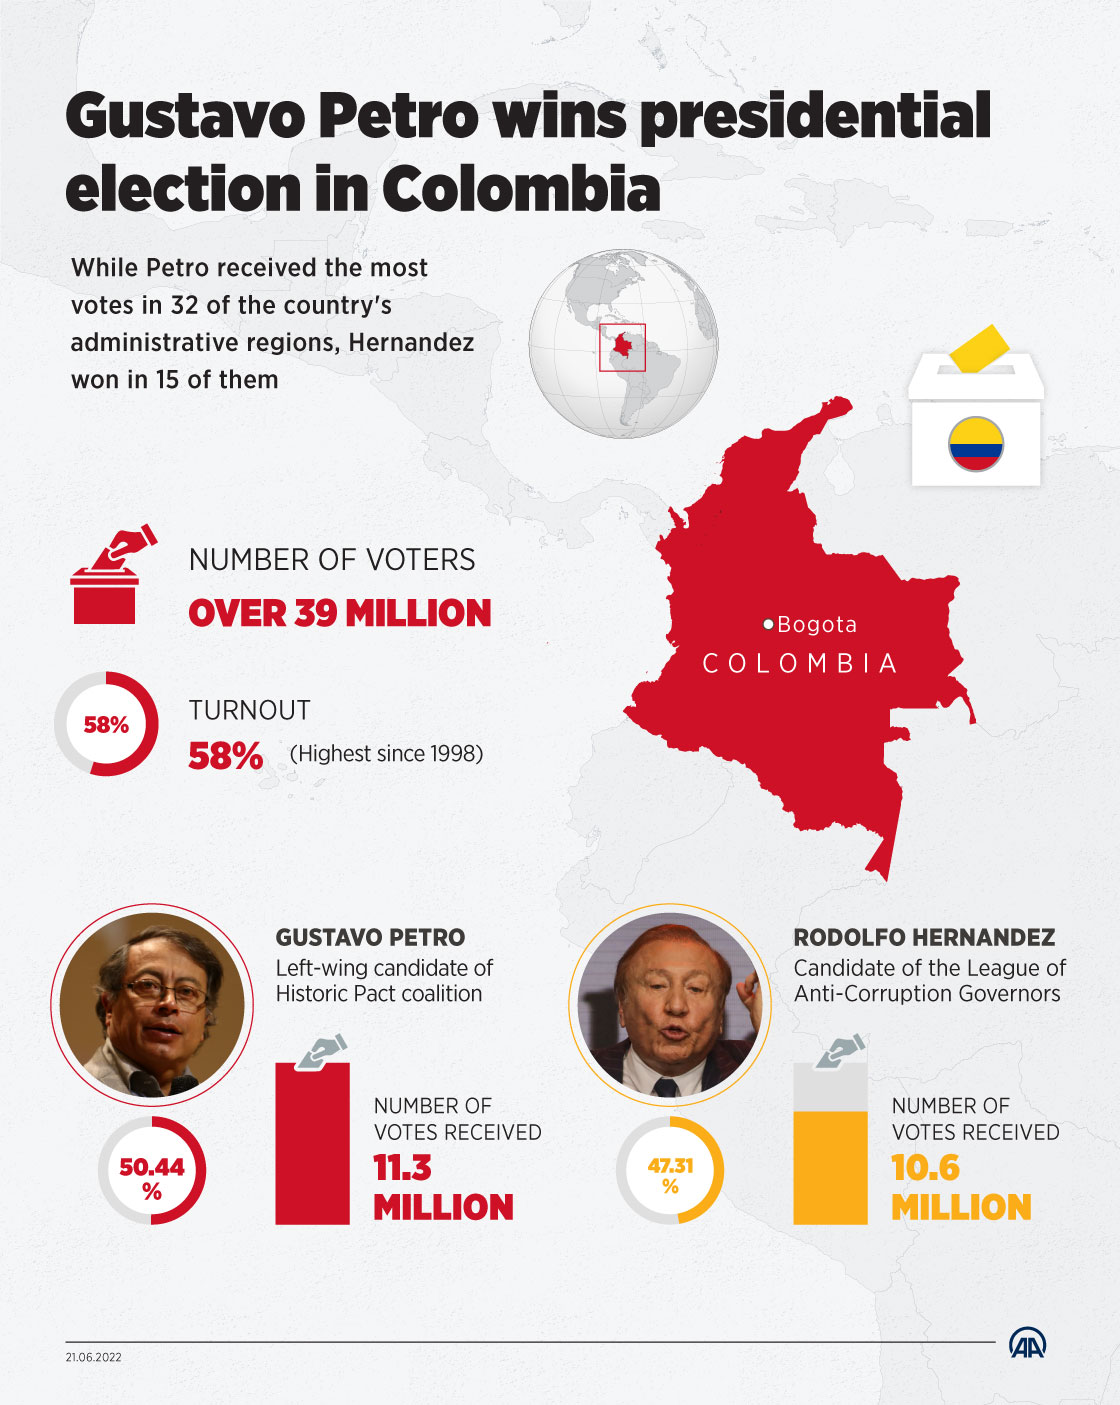 Gustavo Petro wins presidential election in Colombia